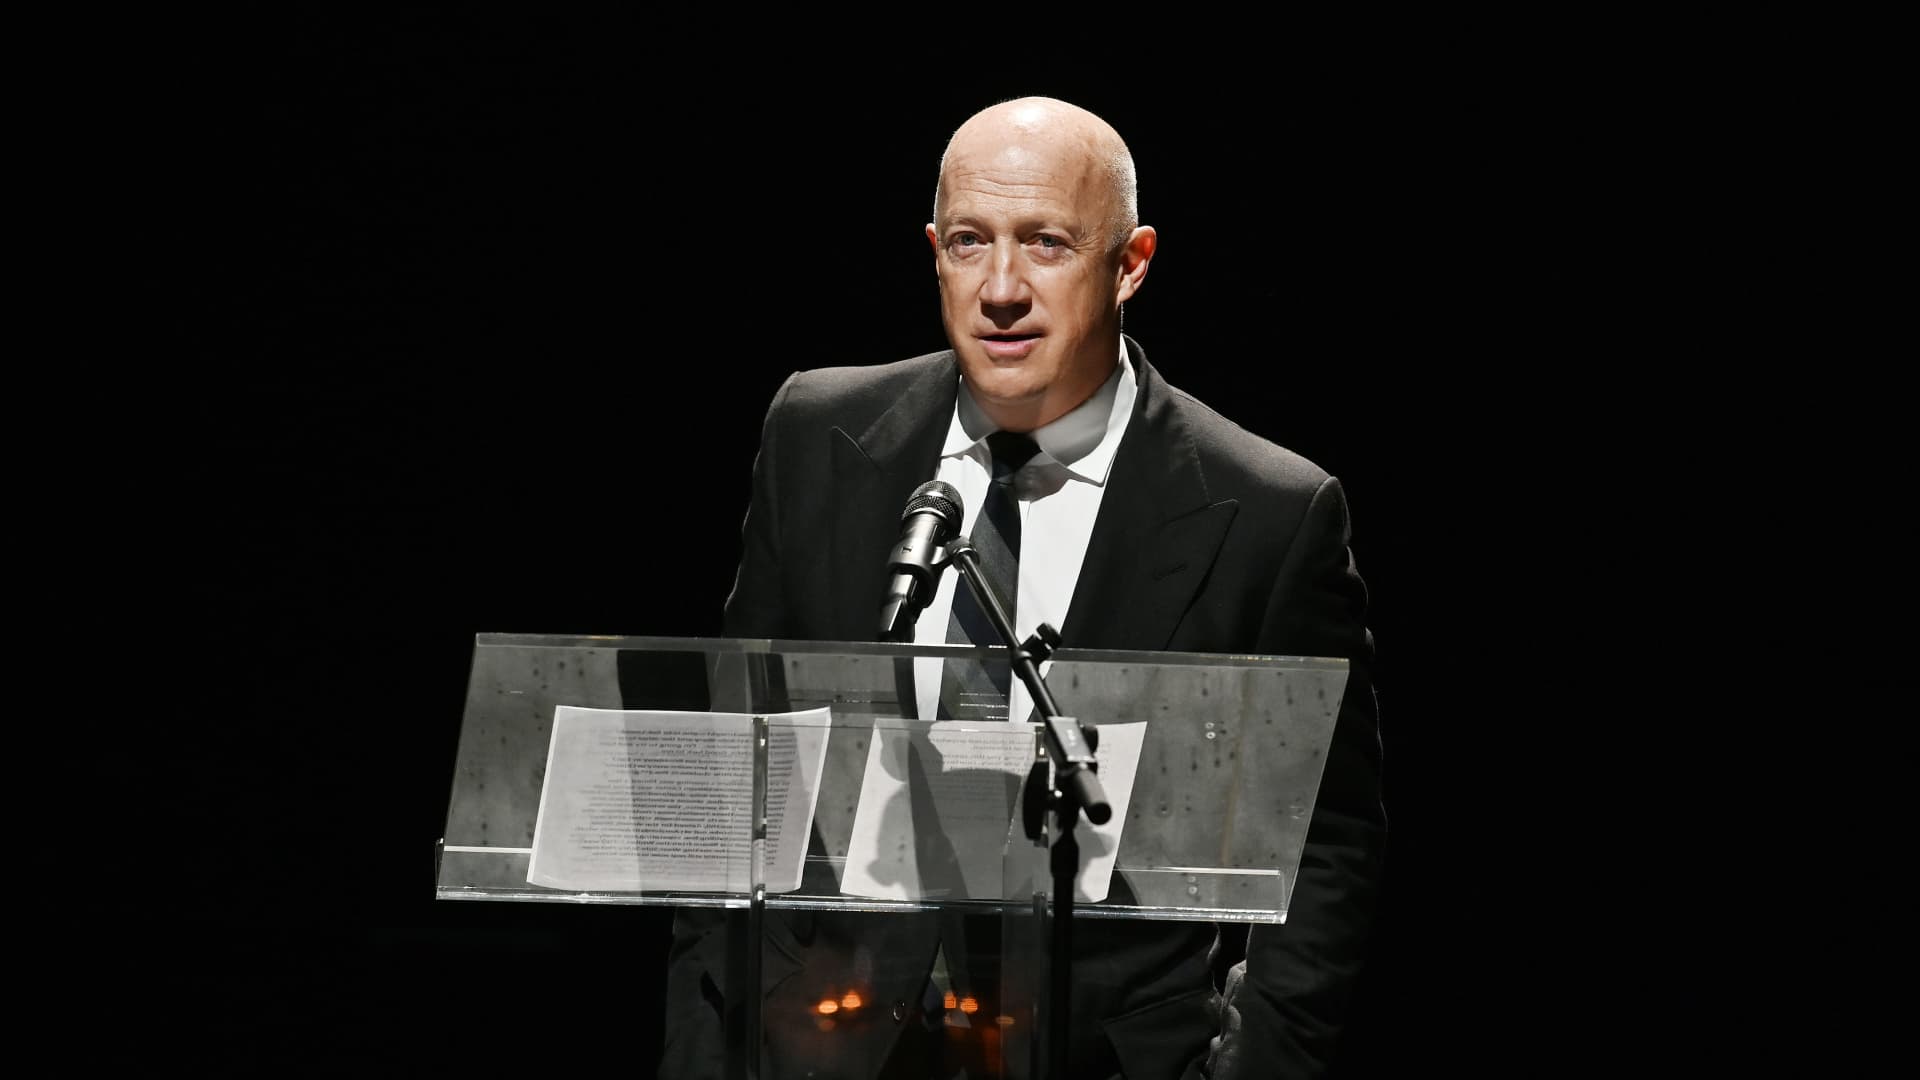 How Bryan Lourd became one of the most powerful people in Hollywood